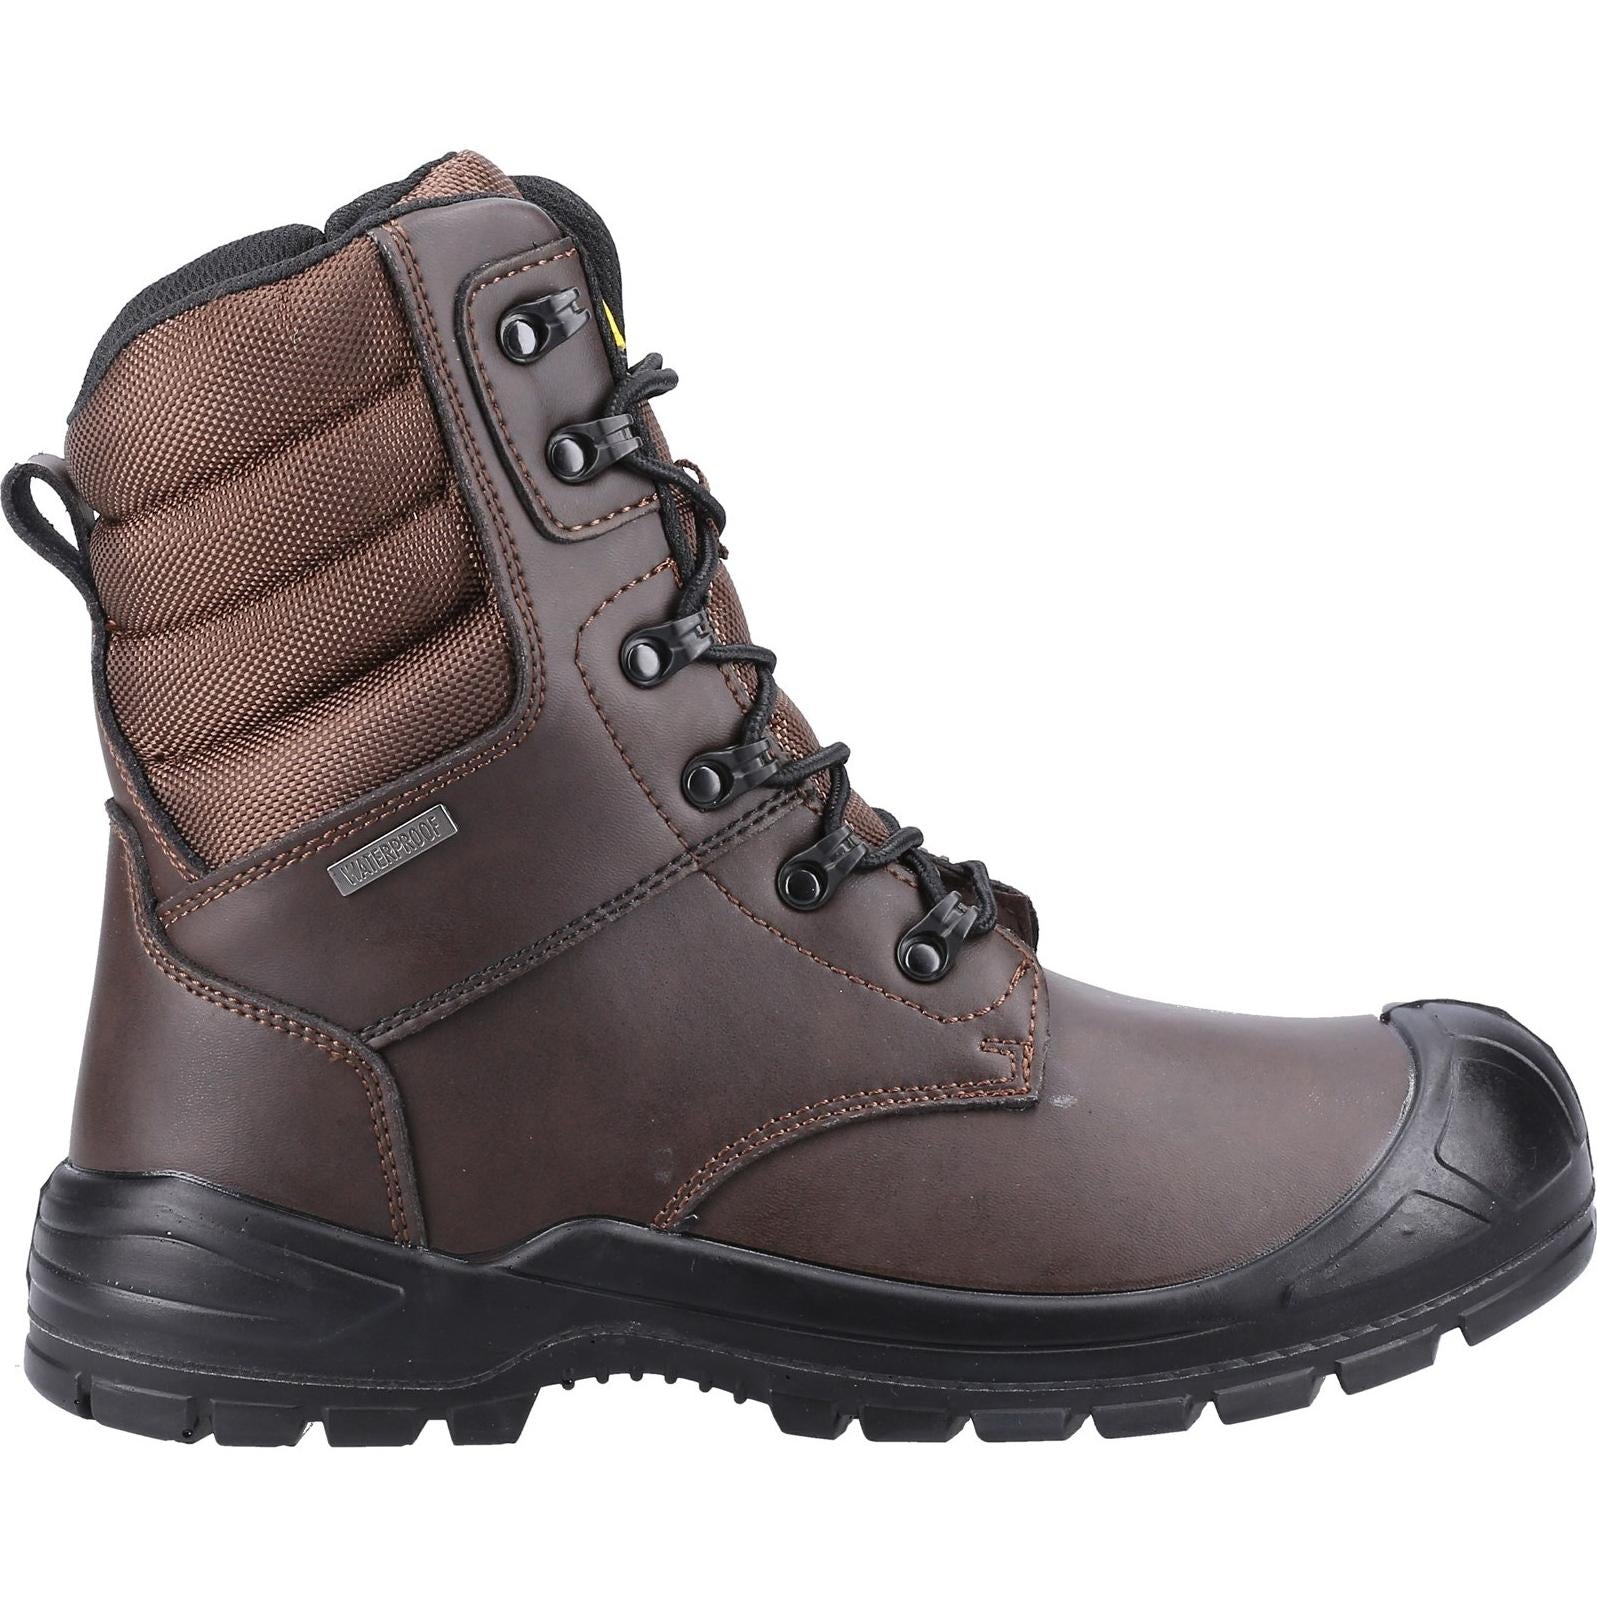 Amblers Safety 240 Safety Boot